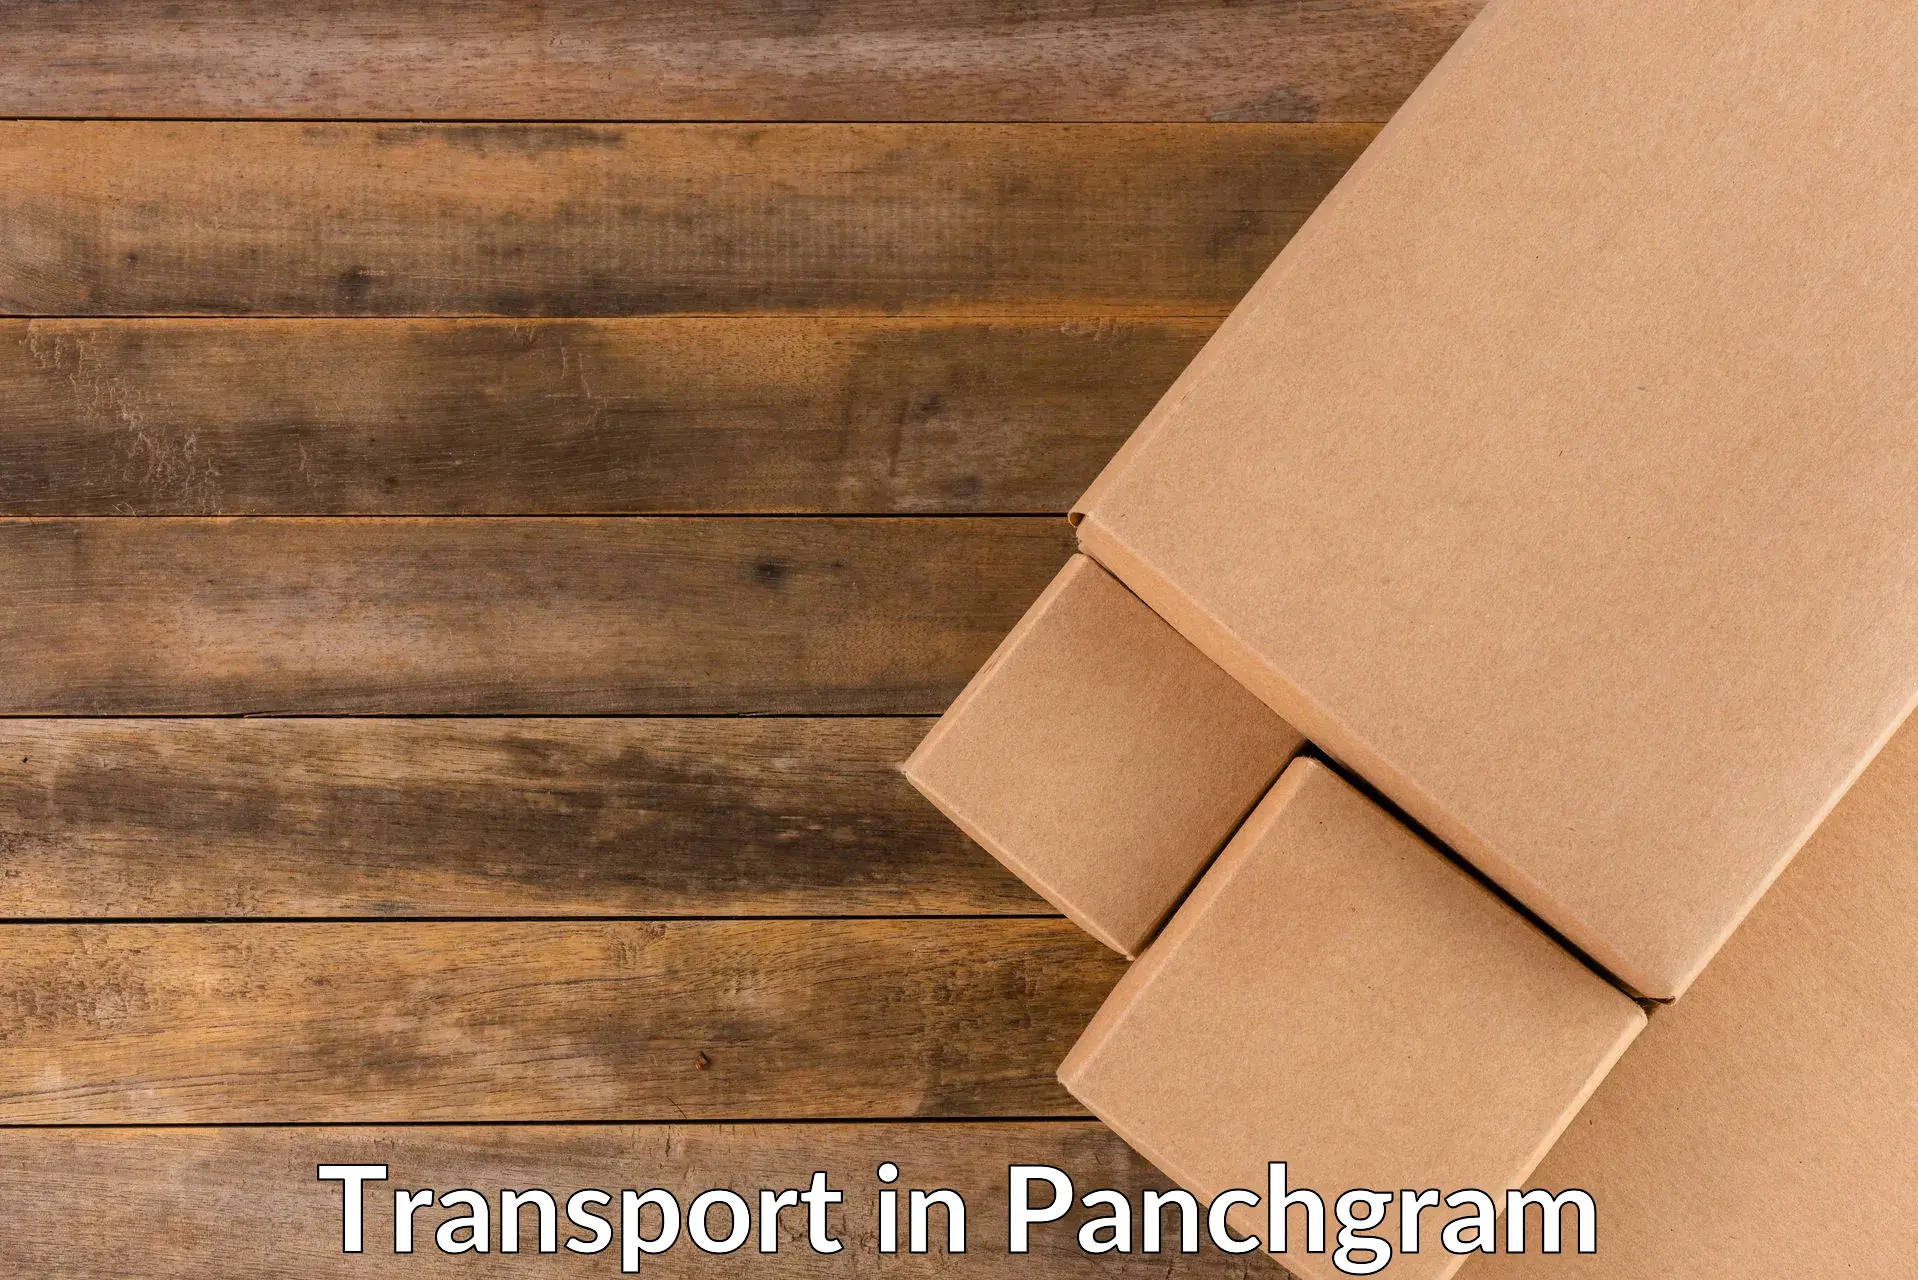 Air cargo transport services in Panchgram